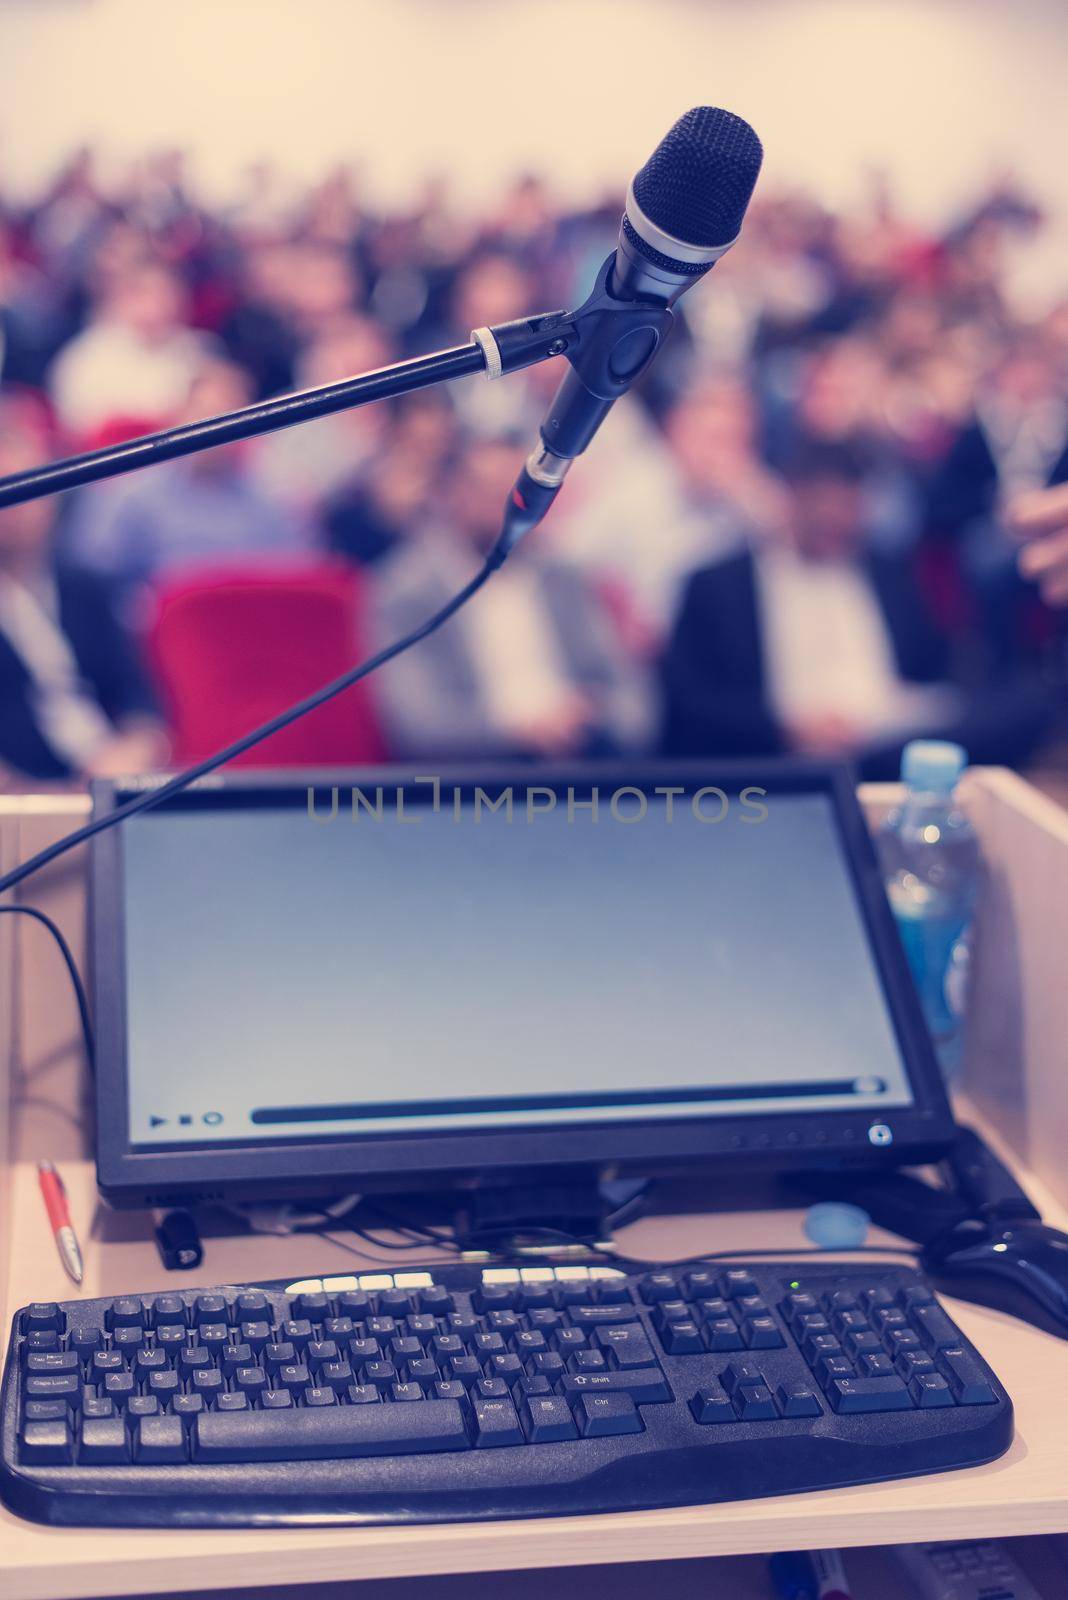 laptop computer and microphone at podium on business seminar education  in modern conference room